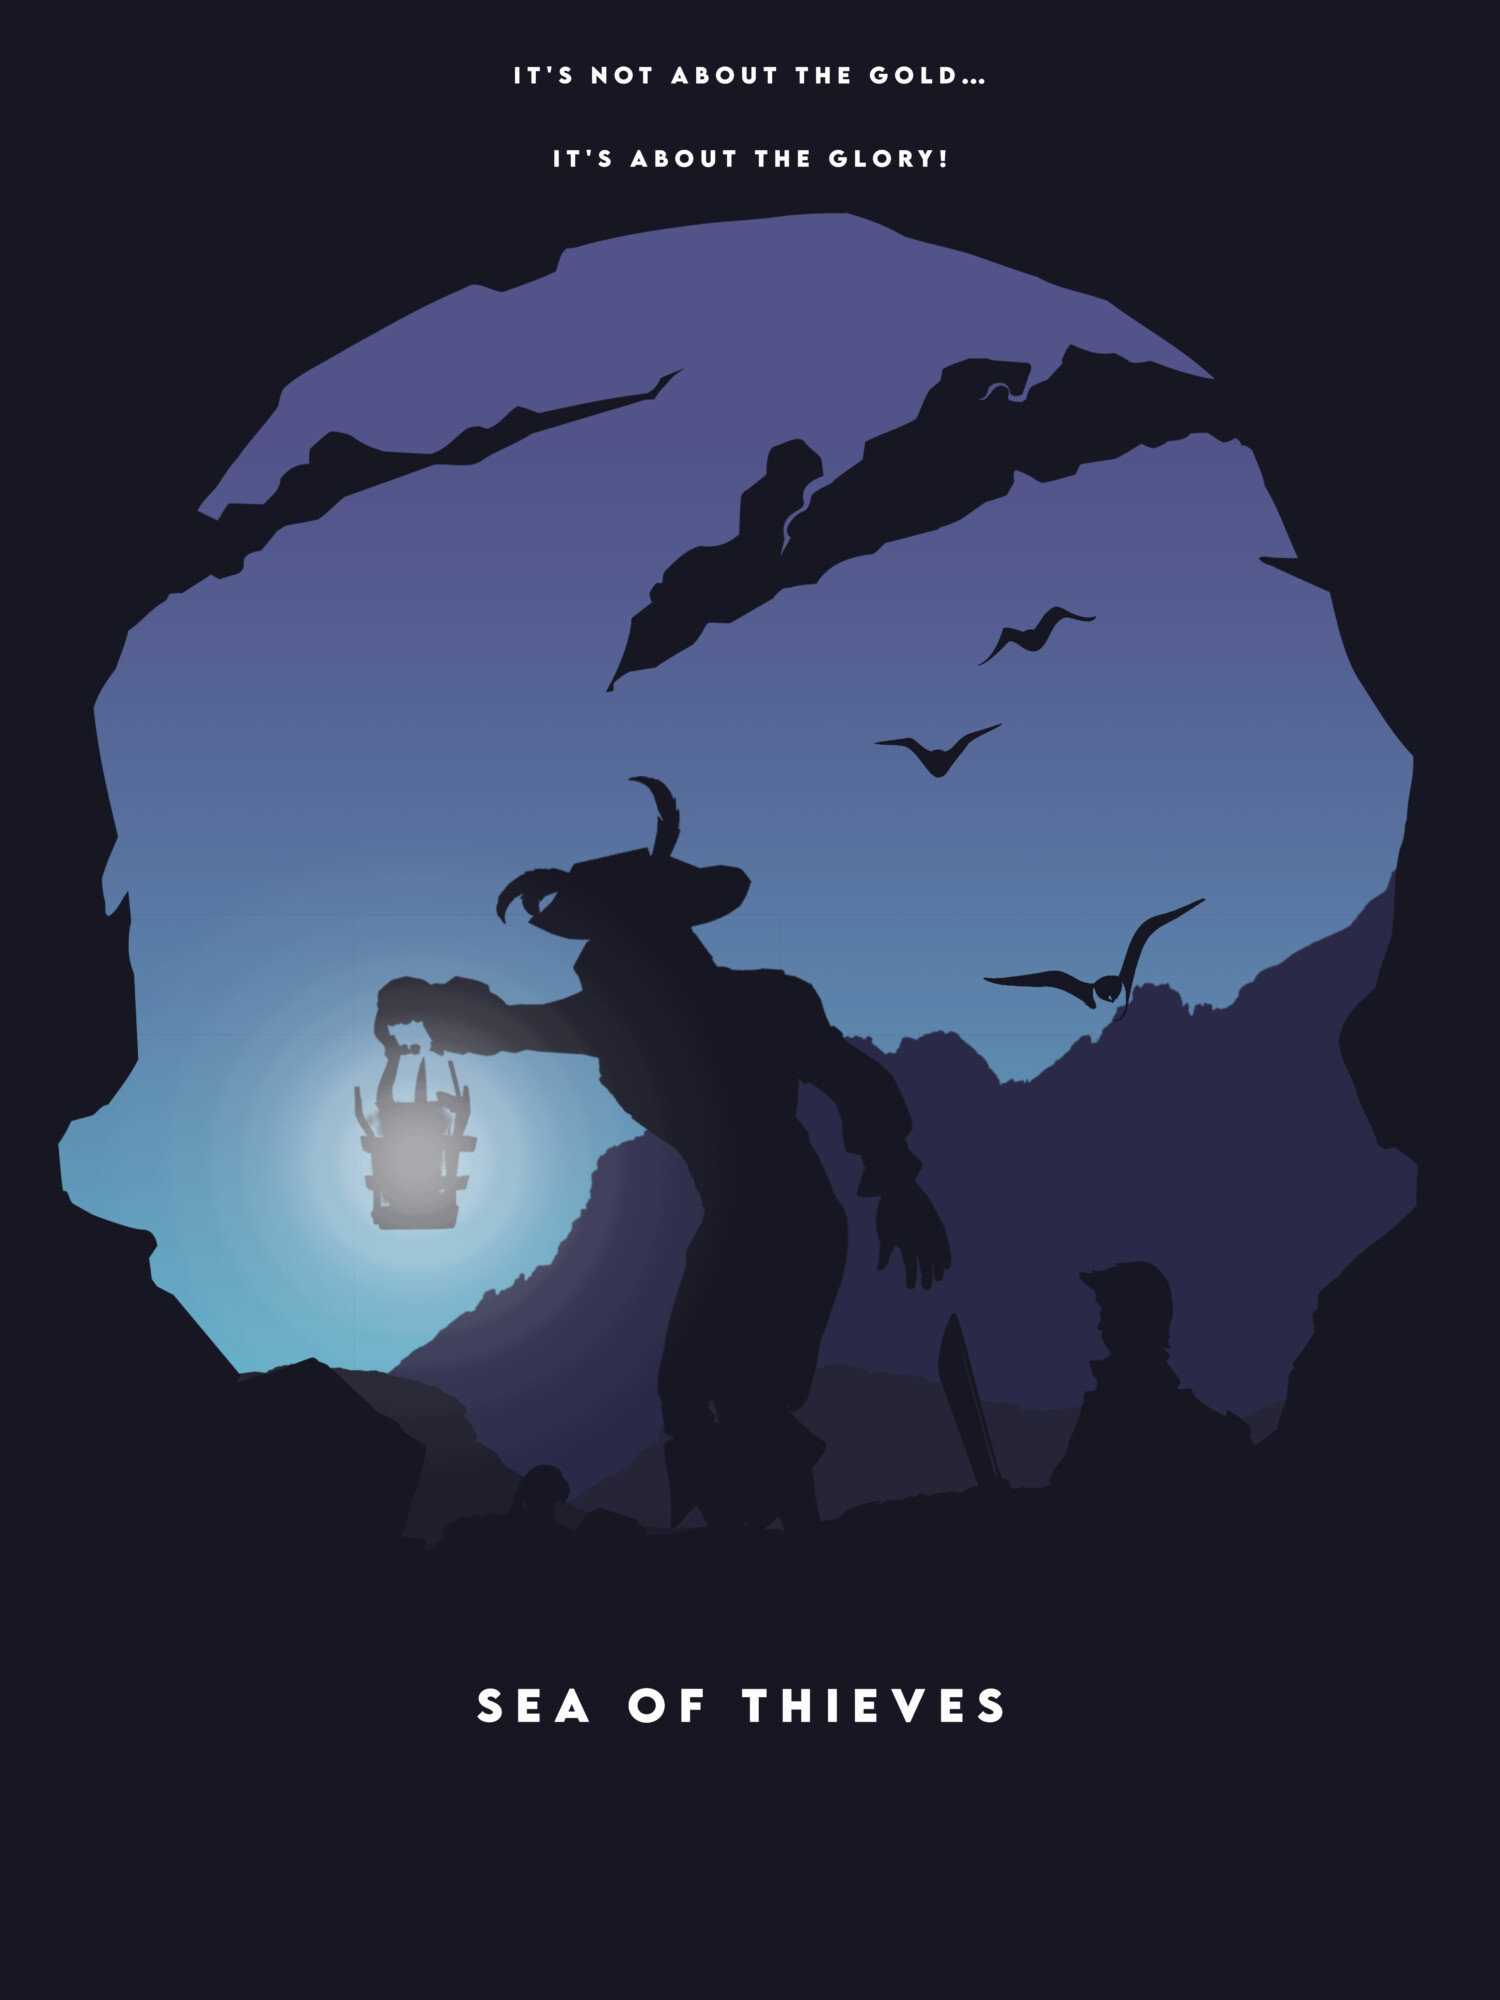 Sea of thieves Alt poster